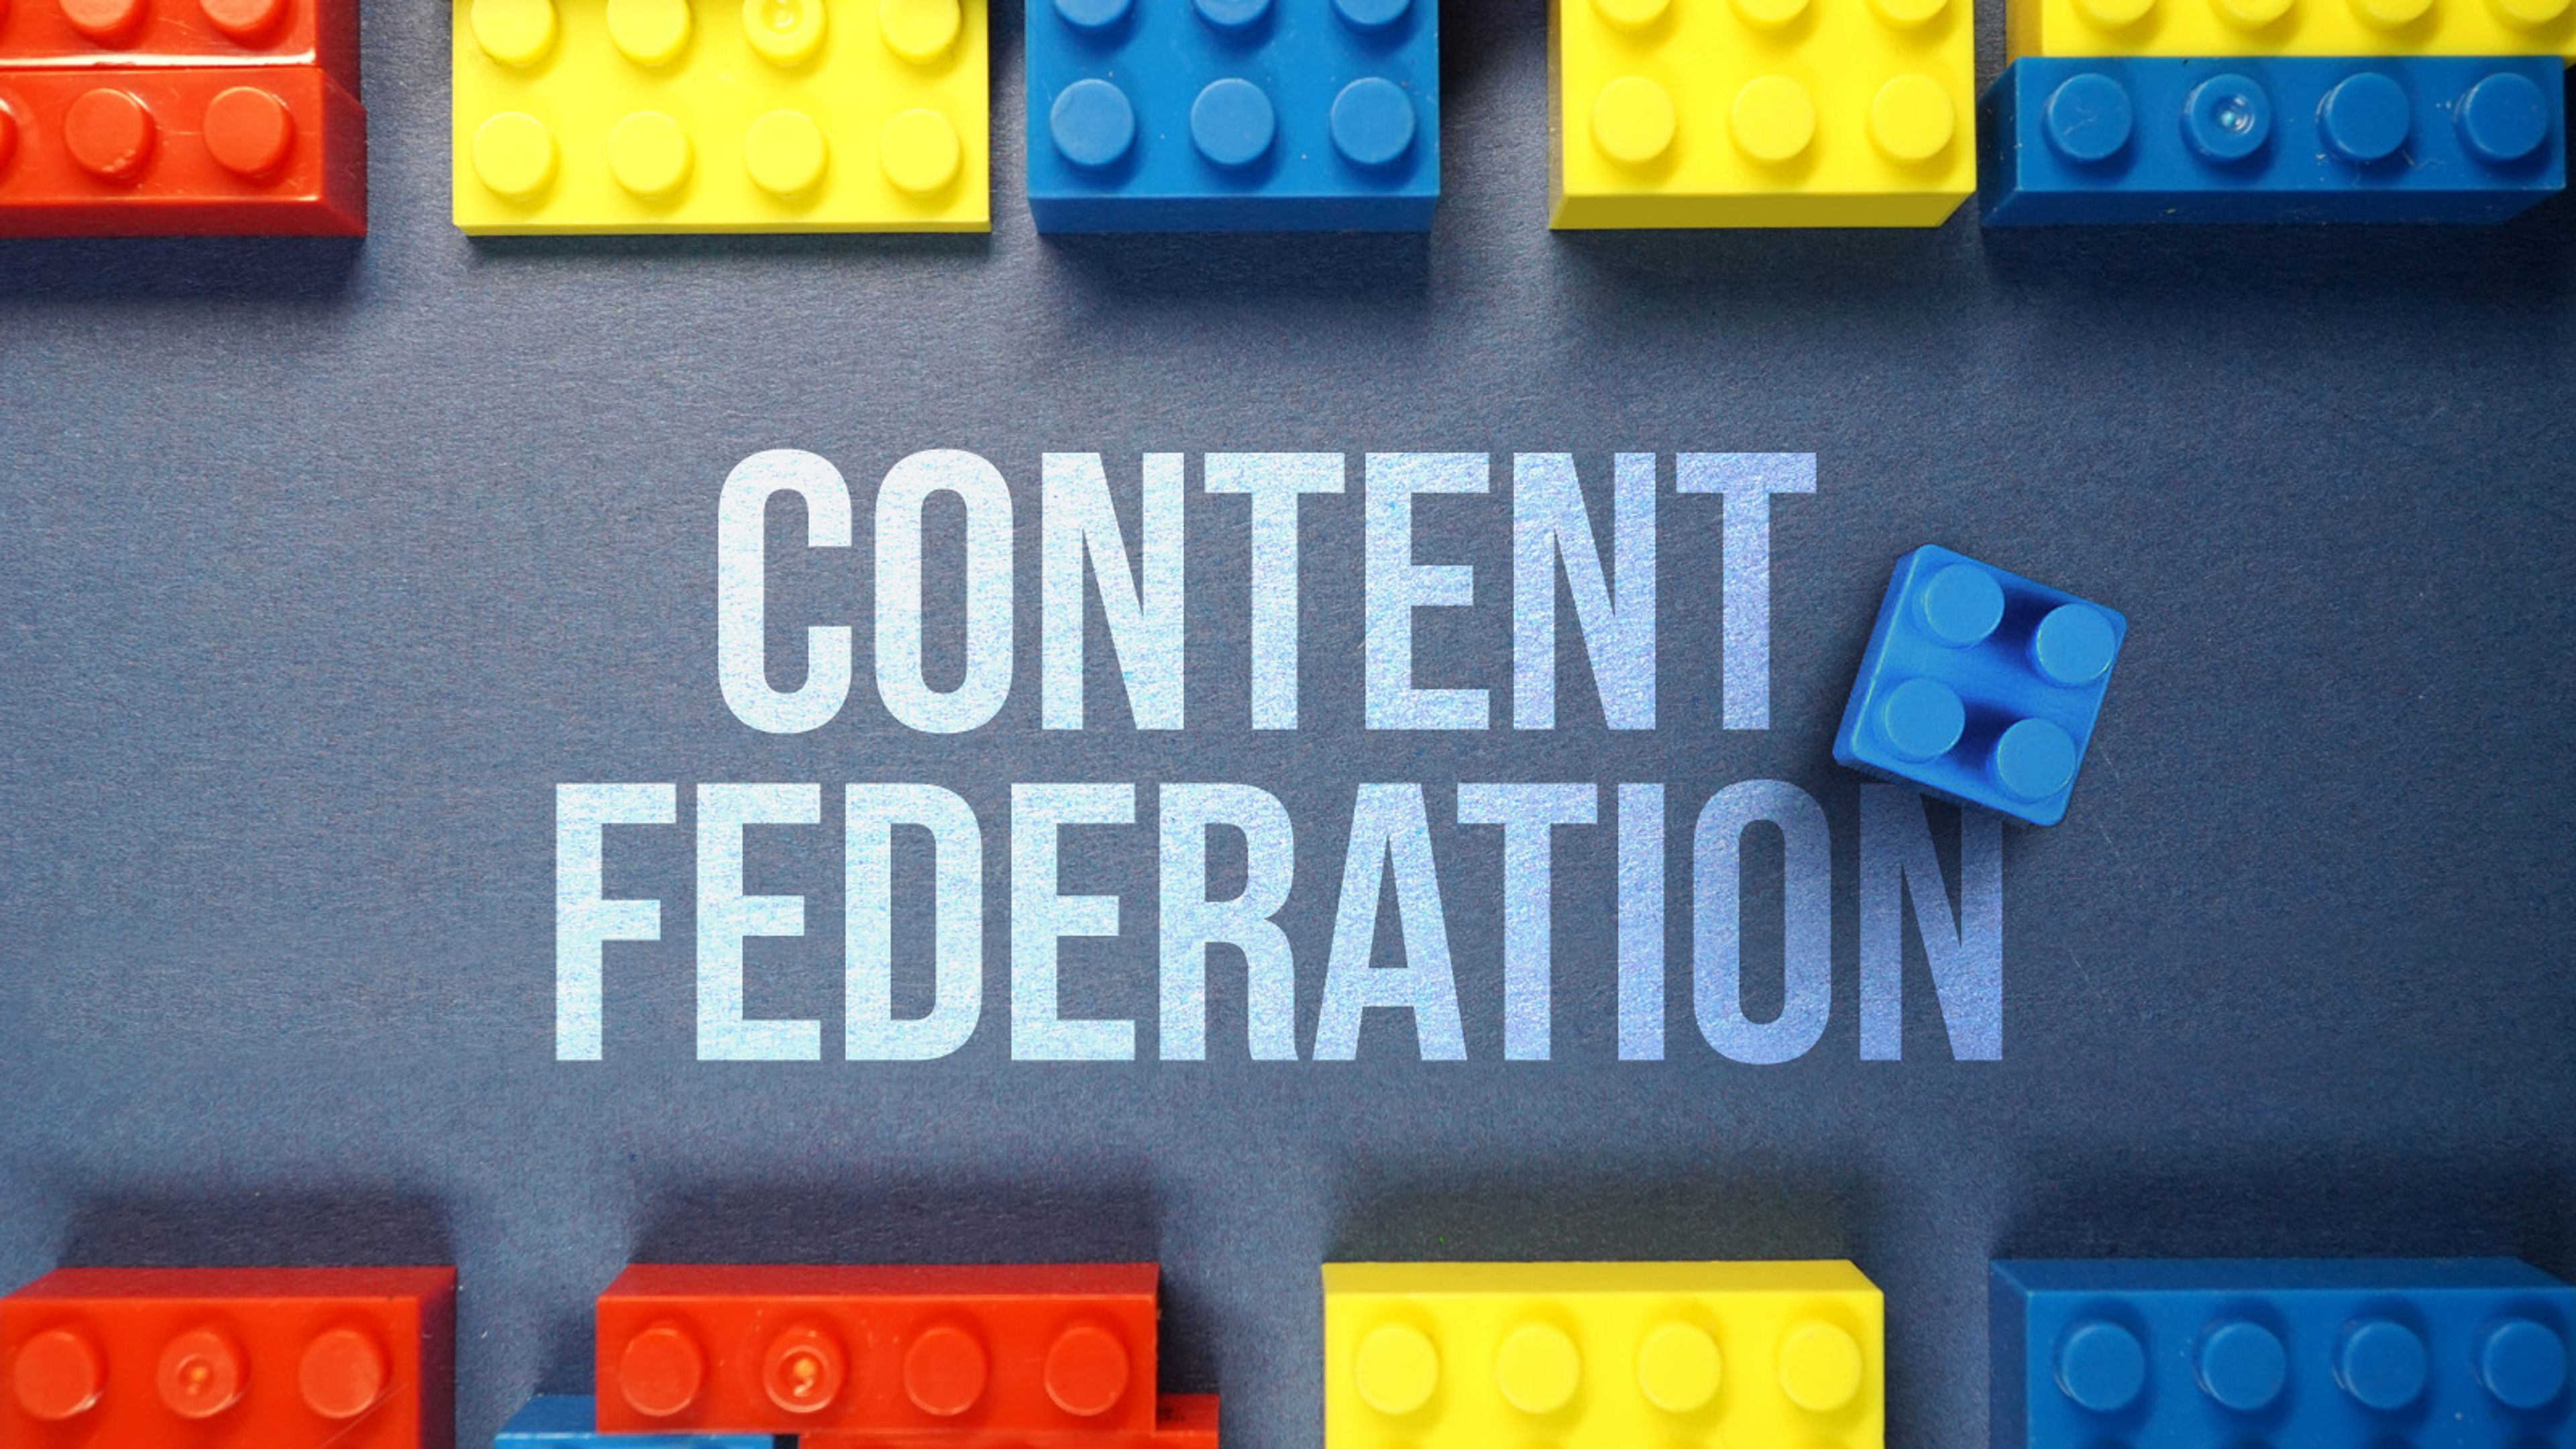 Legos with the words "Content Federation" in the center on a table